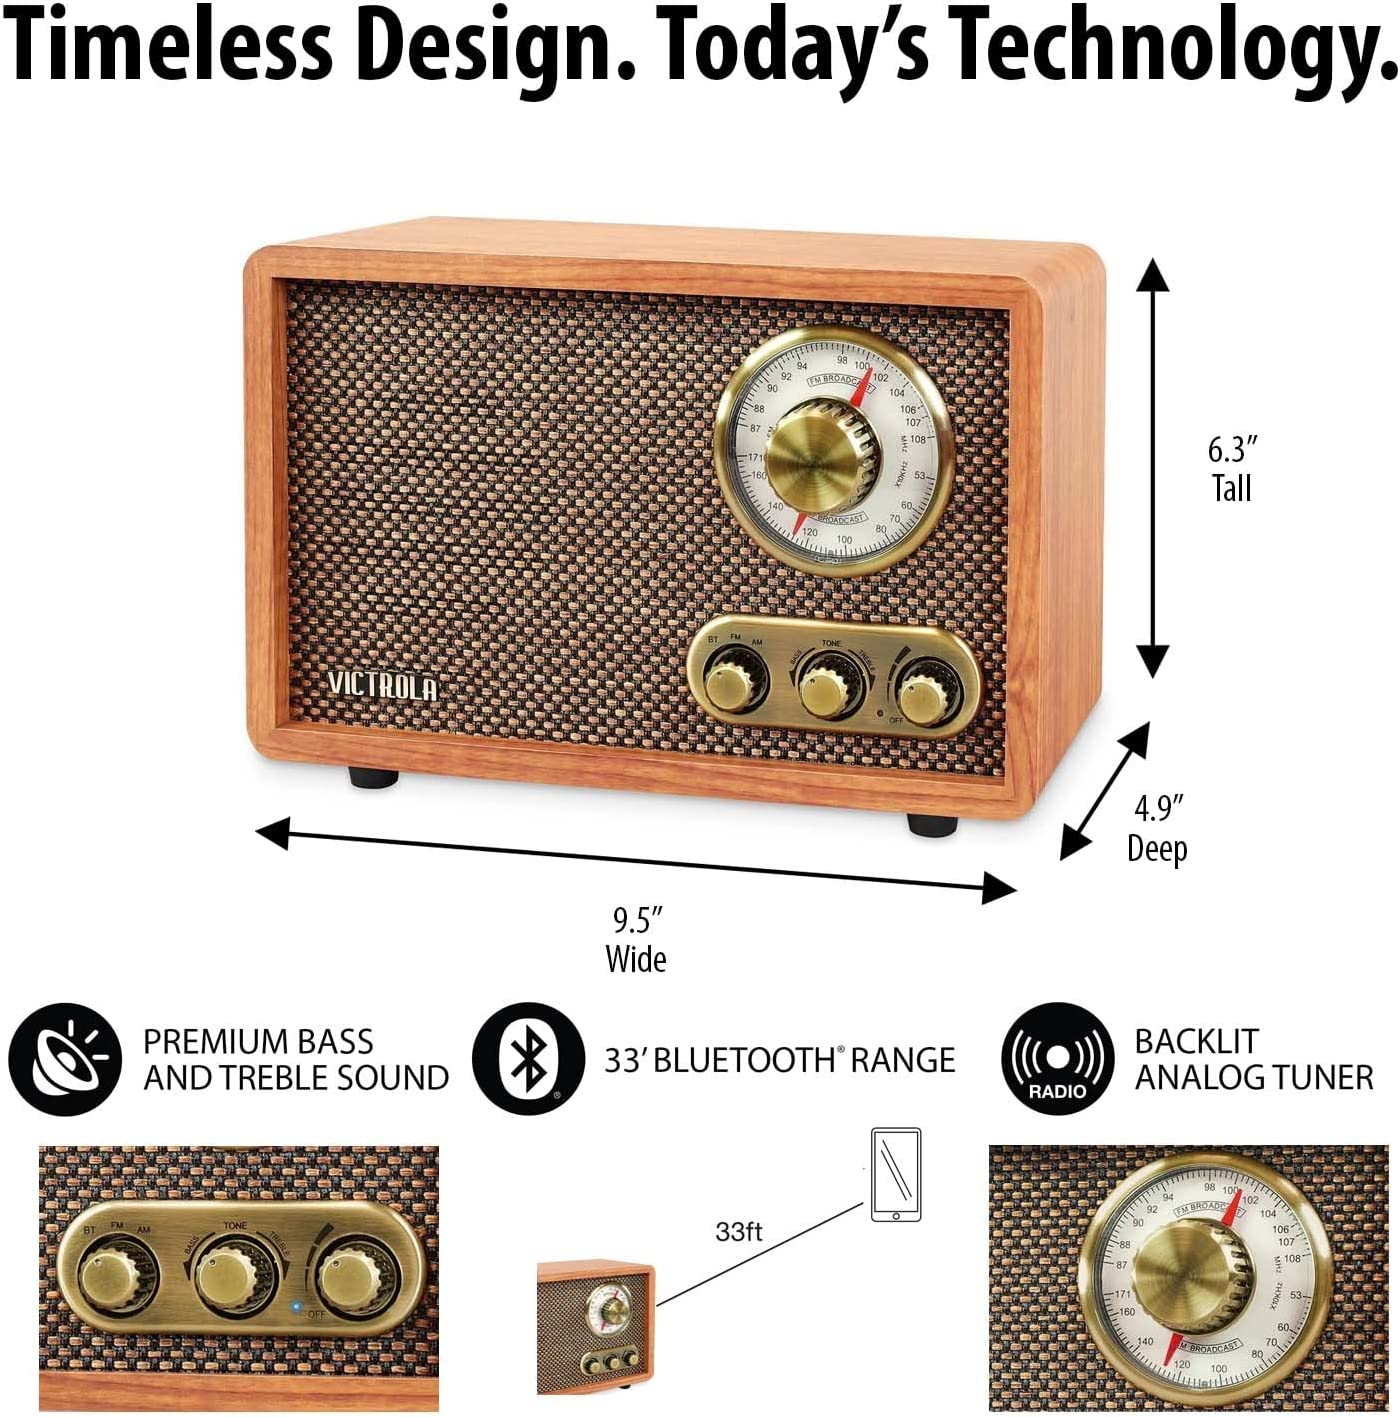 Dimensions and sizing for a wooden retro bluetooth radio. It measures, "9.5 inches wide, 4.9 inches deep and 6.3 inches tall. There is also text which reads, "Premium bass and tremble sound. Backlit analog tuner. 33 feet Bluetooth range." "